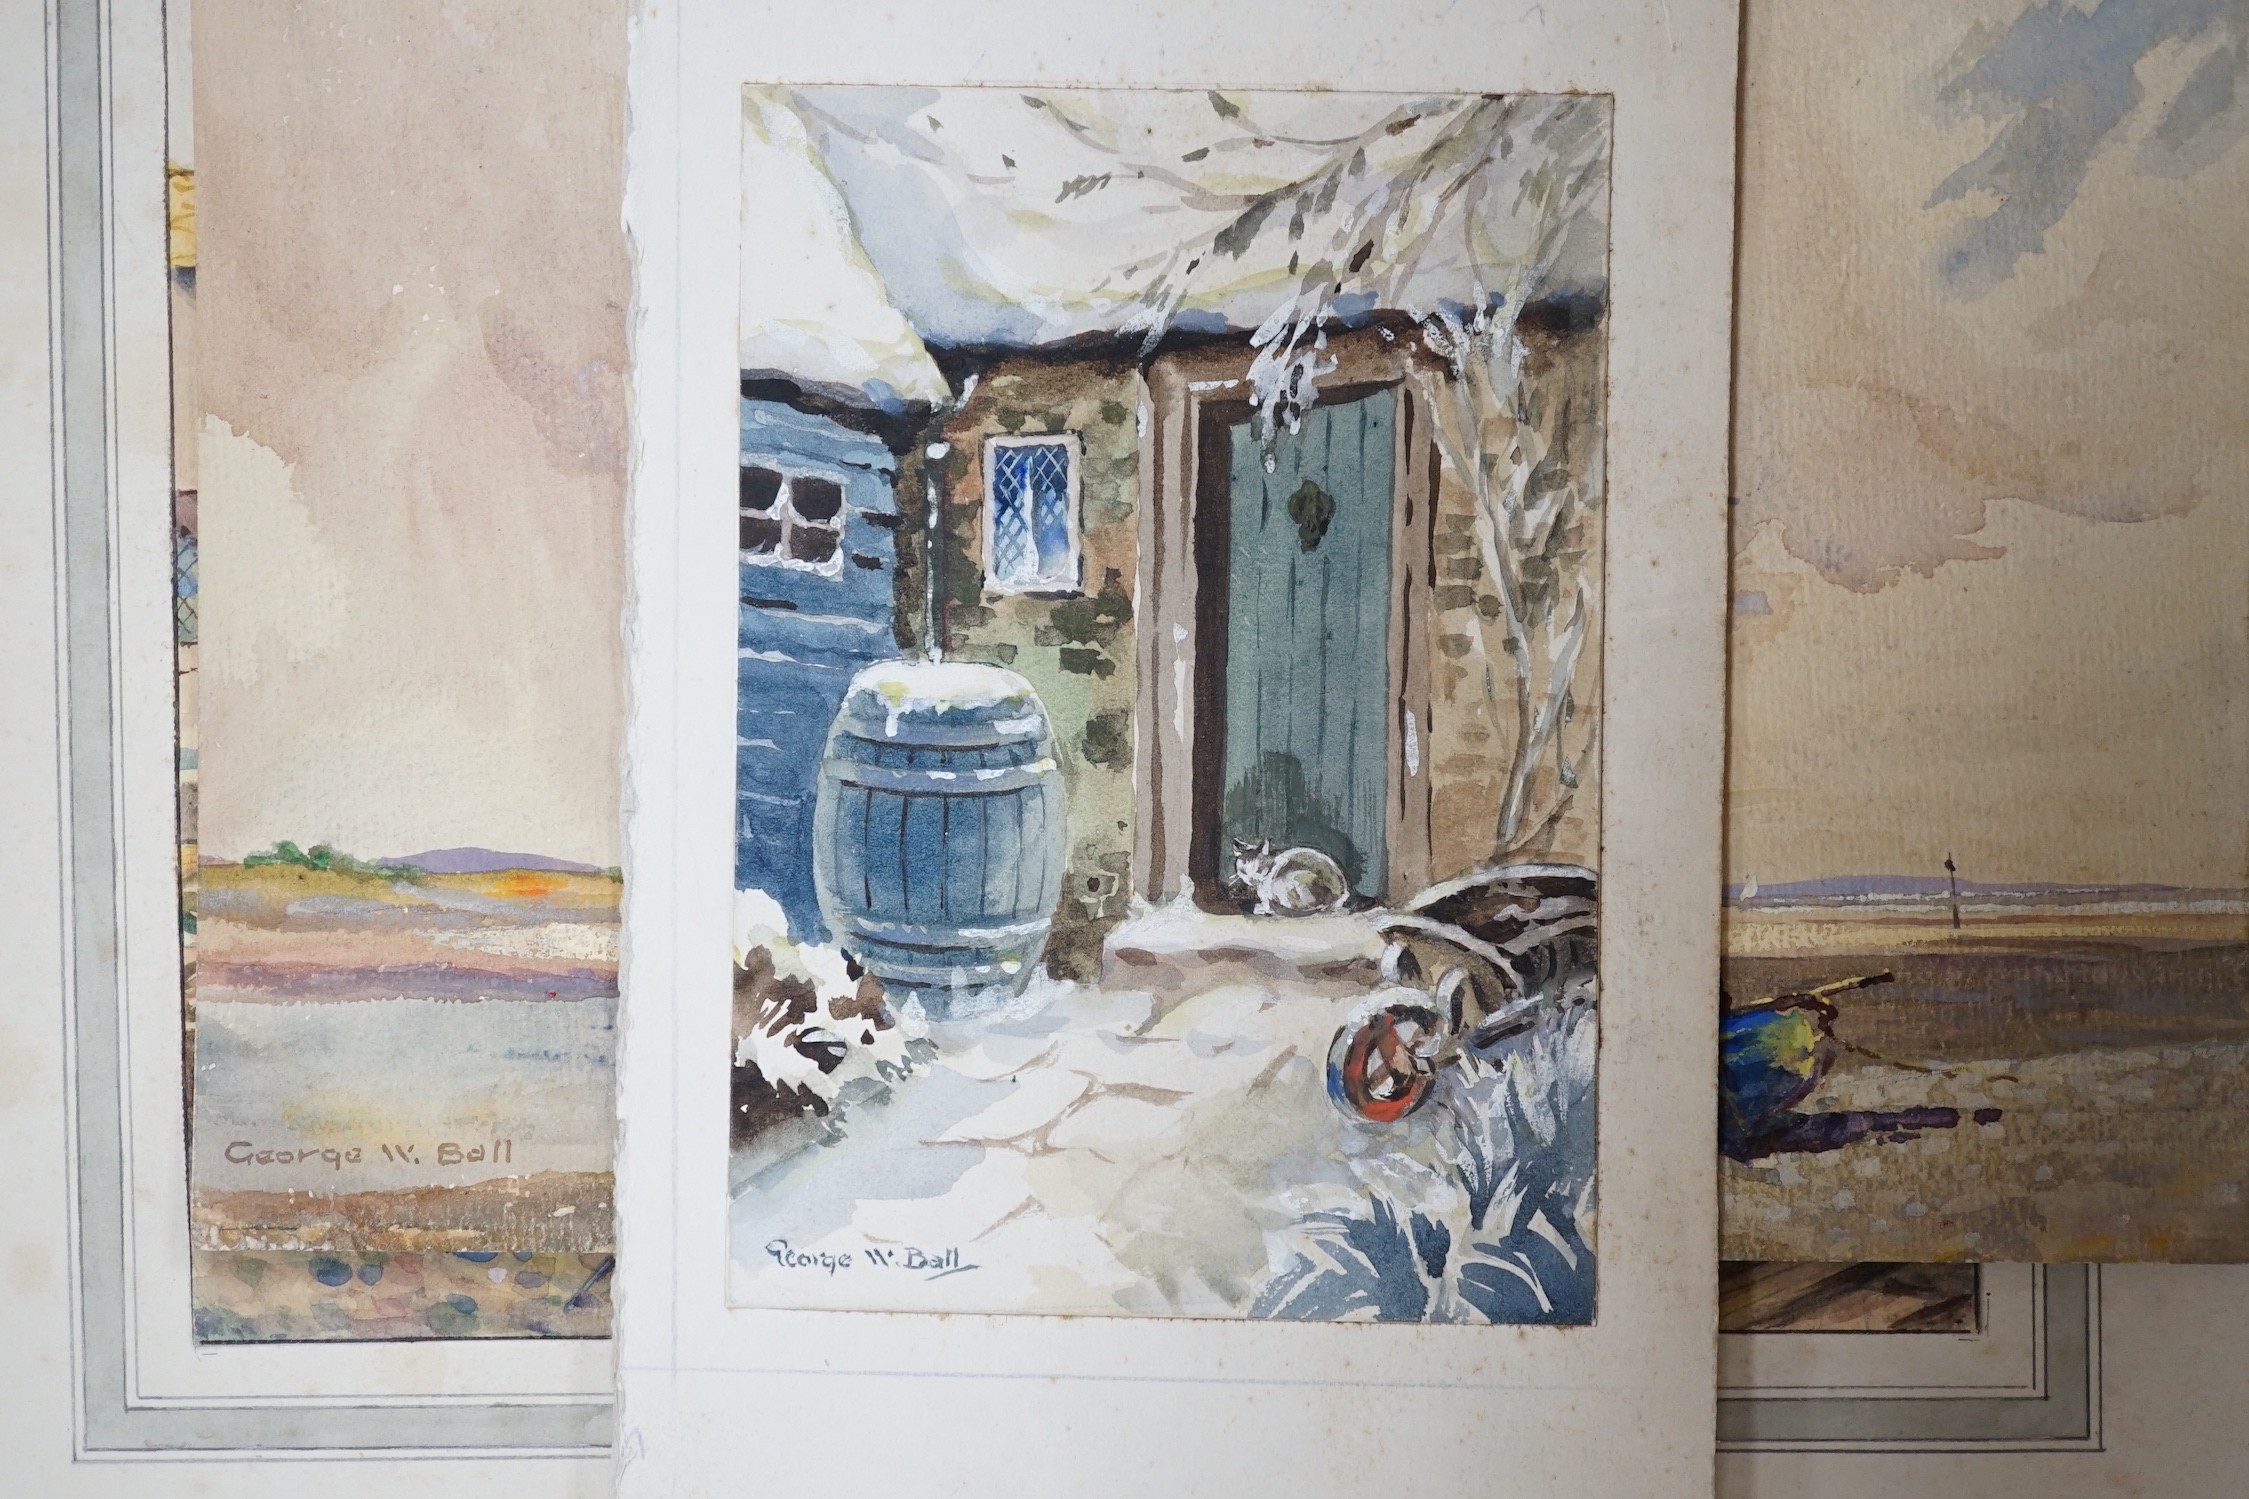 George W. Ball, three watercolour postcard designs, 'The old cottage doorway', 'Estuary, North Wales' and 'An old harbour', largest 18 x 23cm and a Francis Bolton watercolour, View of Criccieth Castle, North Wales', 18 x